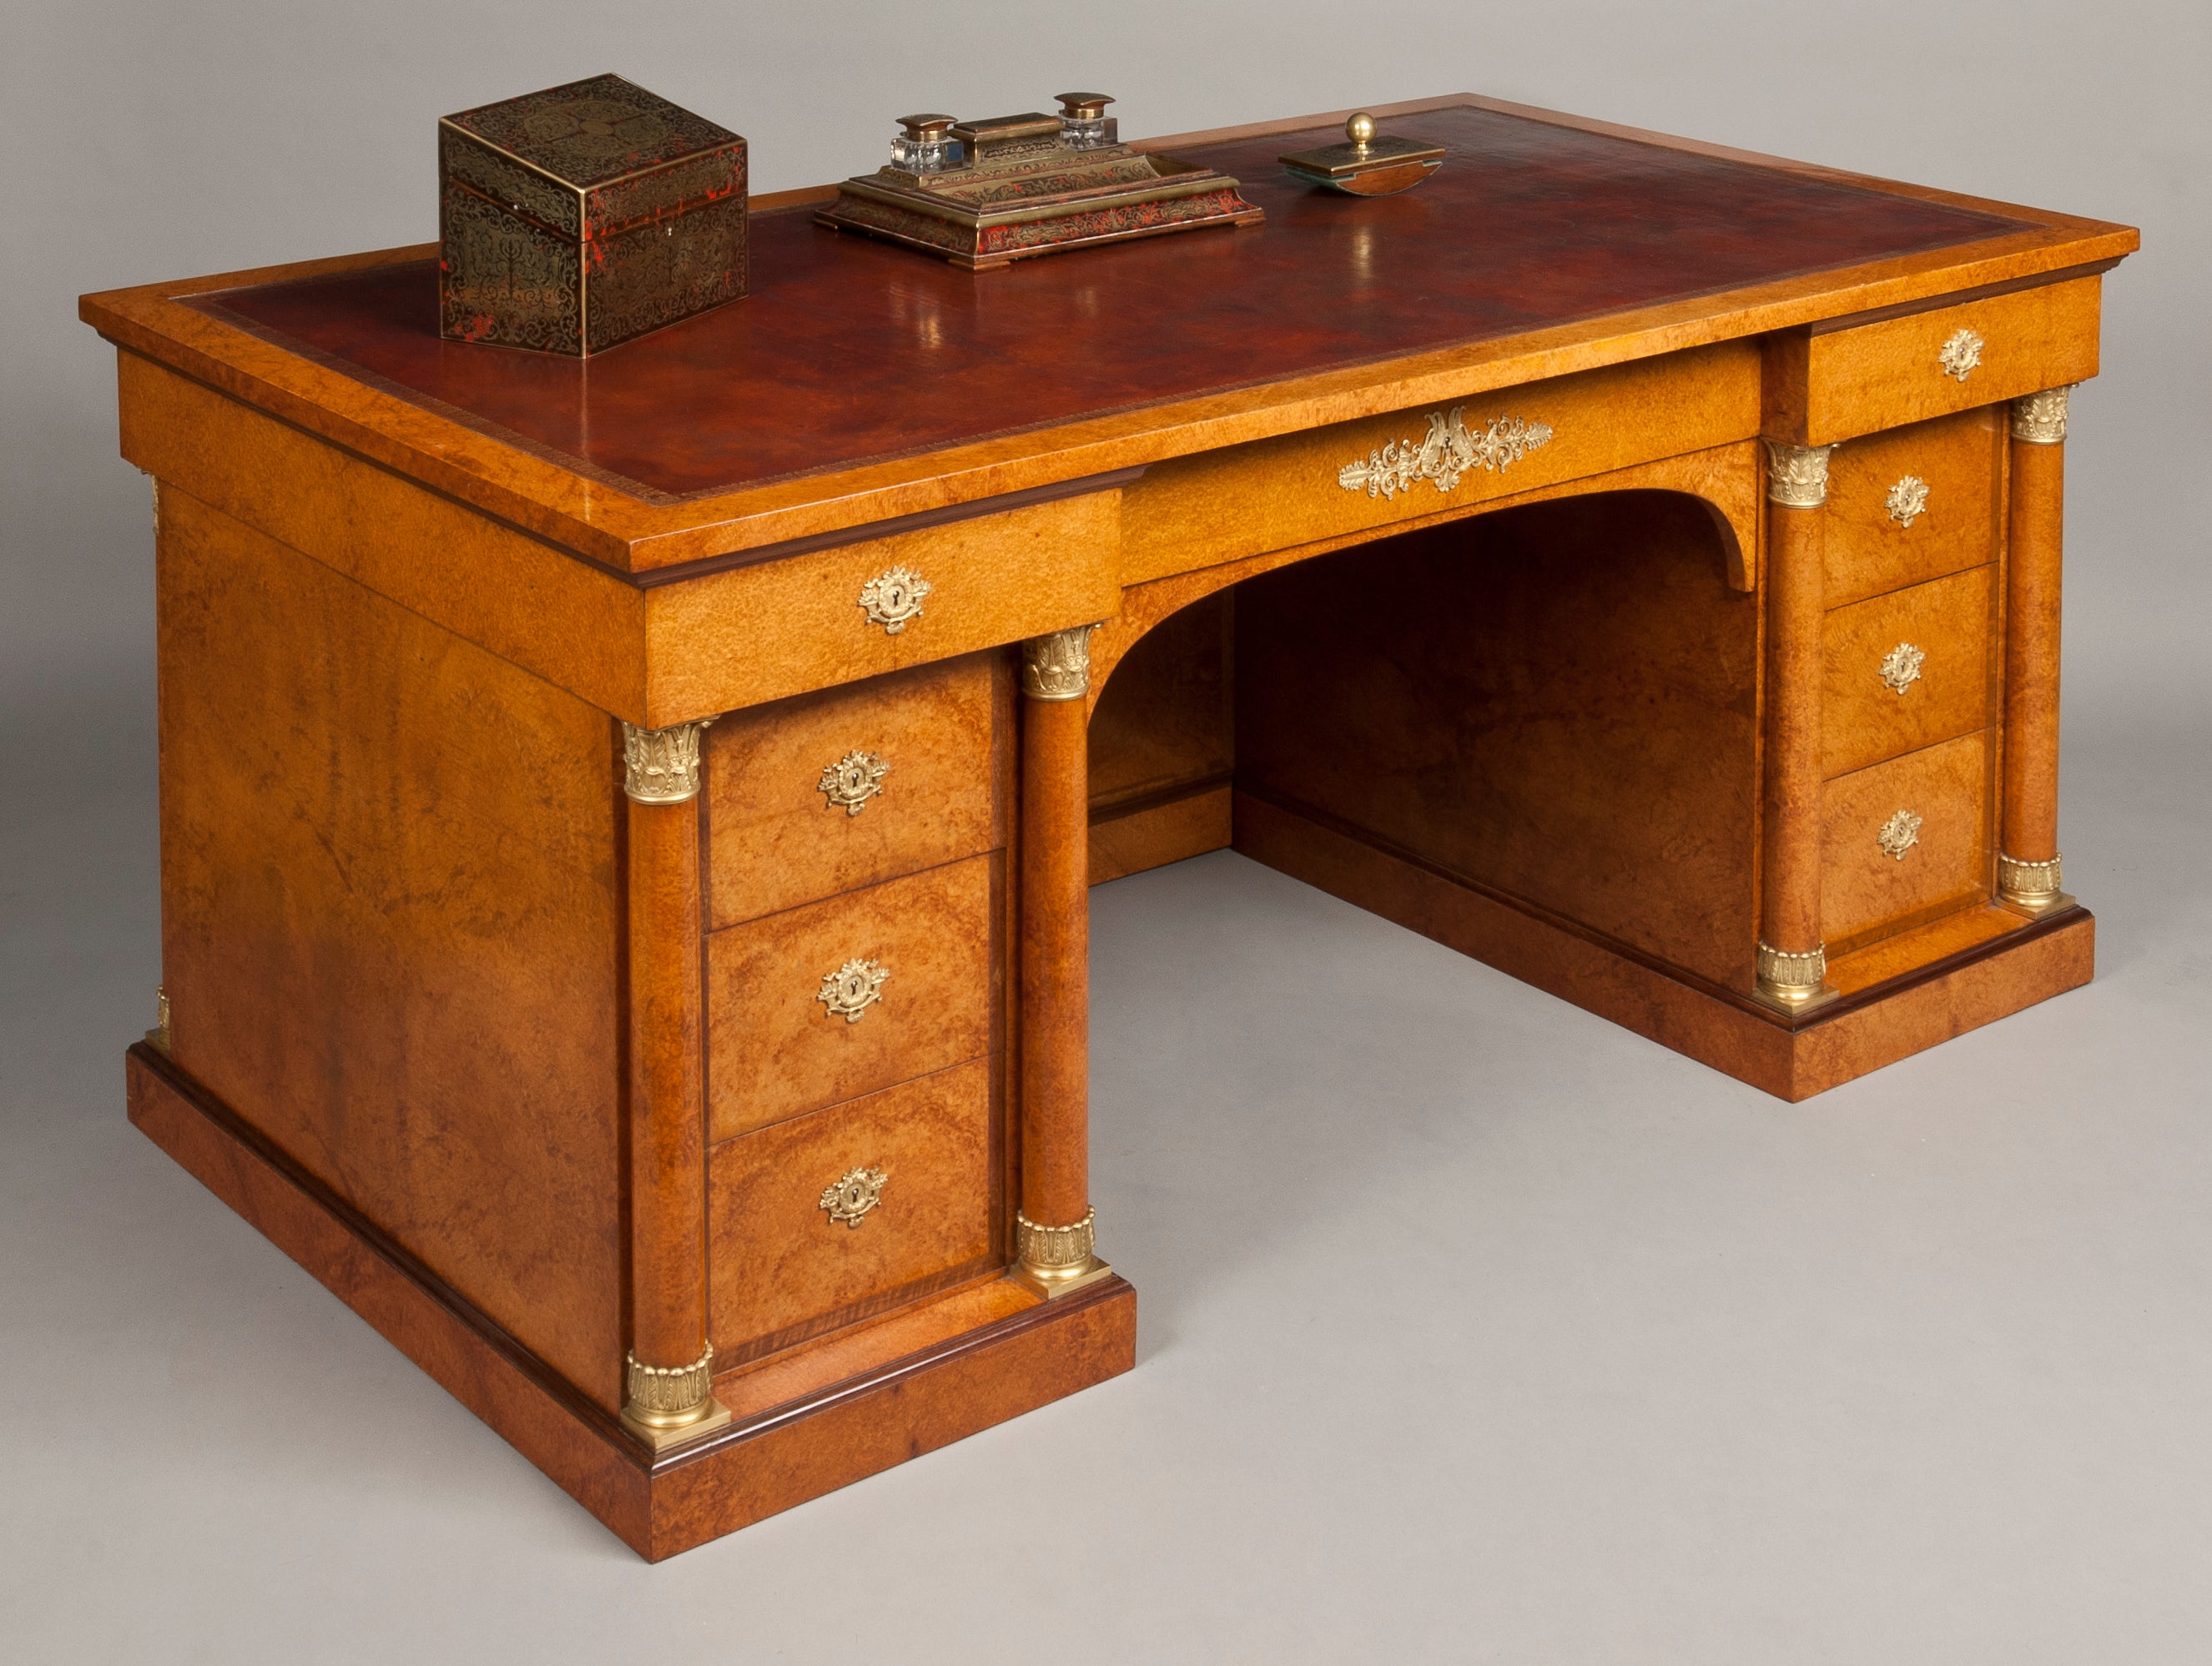 A Fine Antique Library Desk in the Empire Manner by Krieger of Paris